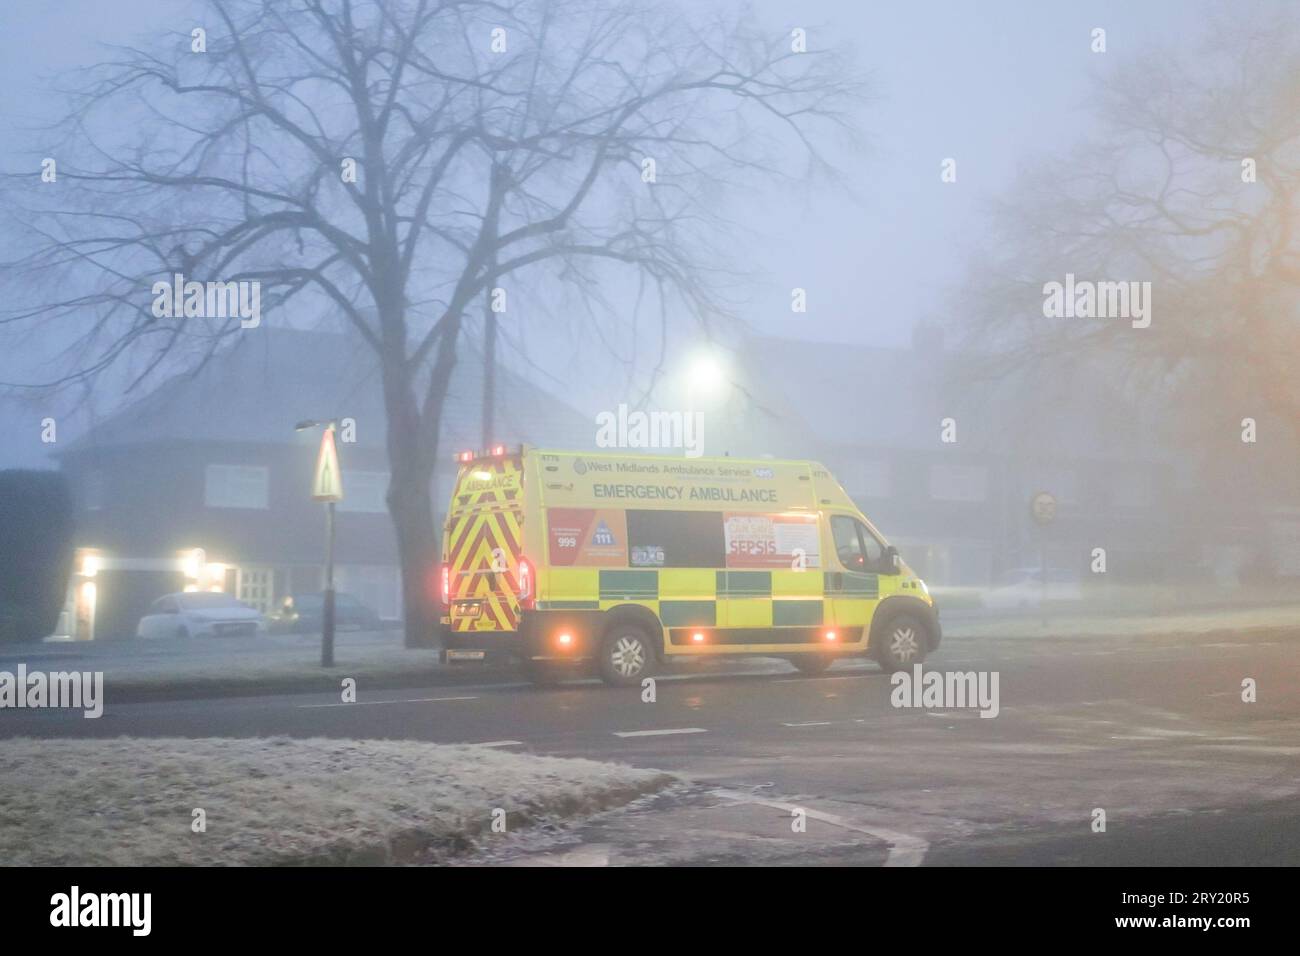 Kidderminster, UK. 7th January, 2021. UK weather: heavy fog and freezing temperatures makes travel very unnerving for motorists and emergency services with treacherous road conditions. Credit: Lee Hudson/Alamy Stock Photo